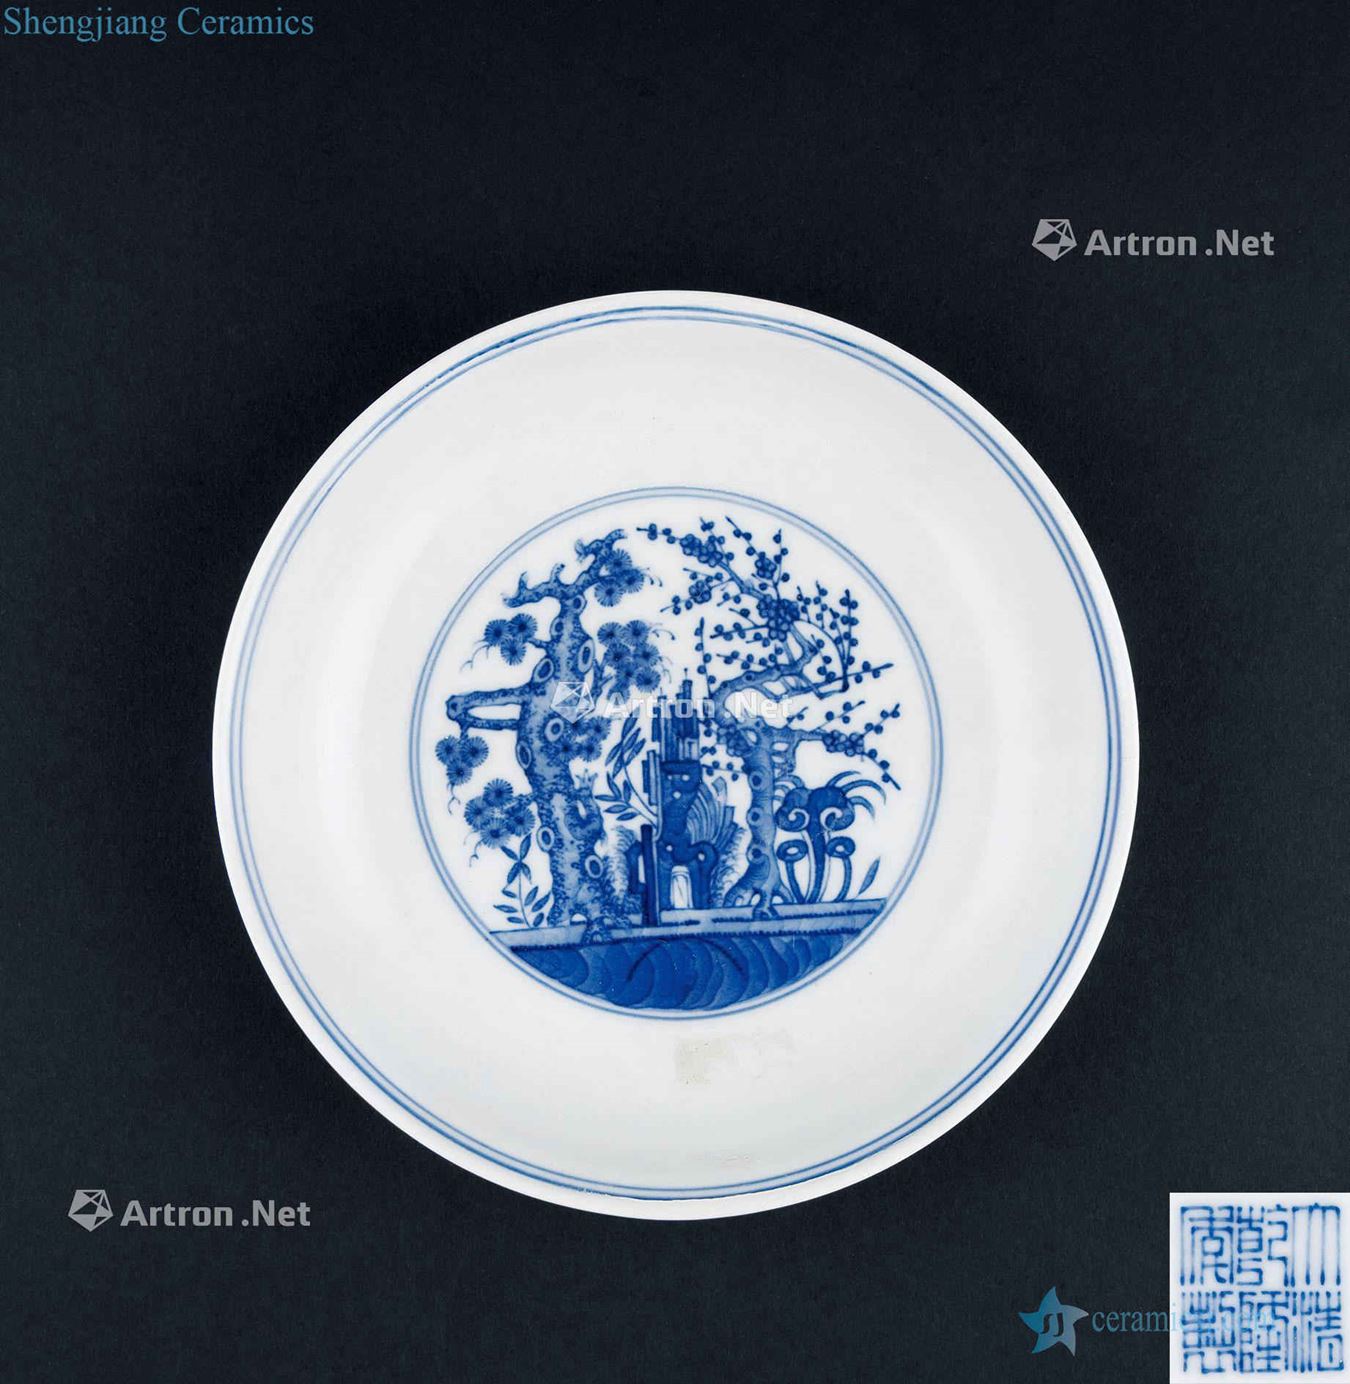 Qing emperor qianlong (1736-1795) blue and white characters years poetic lines